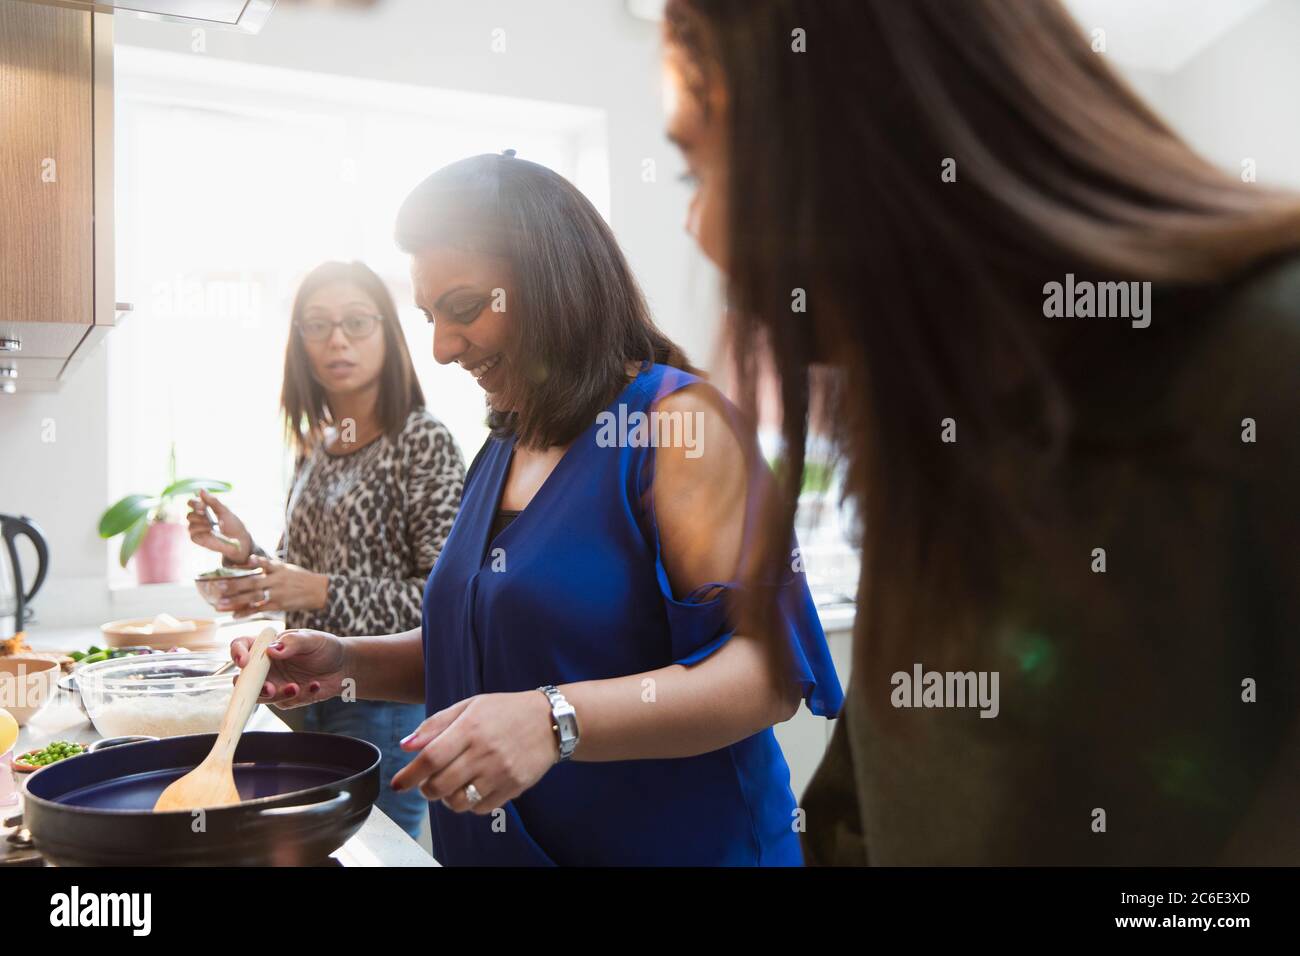 Indian women cooking in kitchen Stock Photo